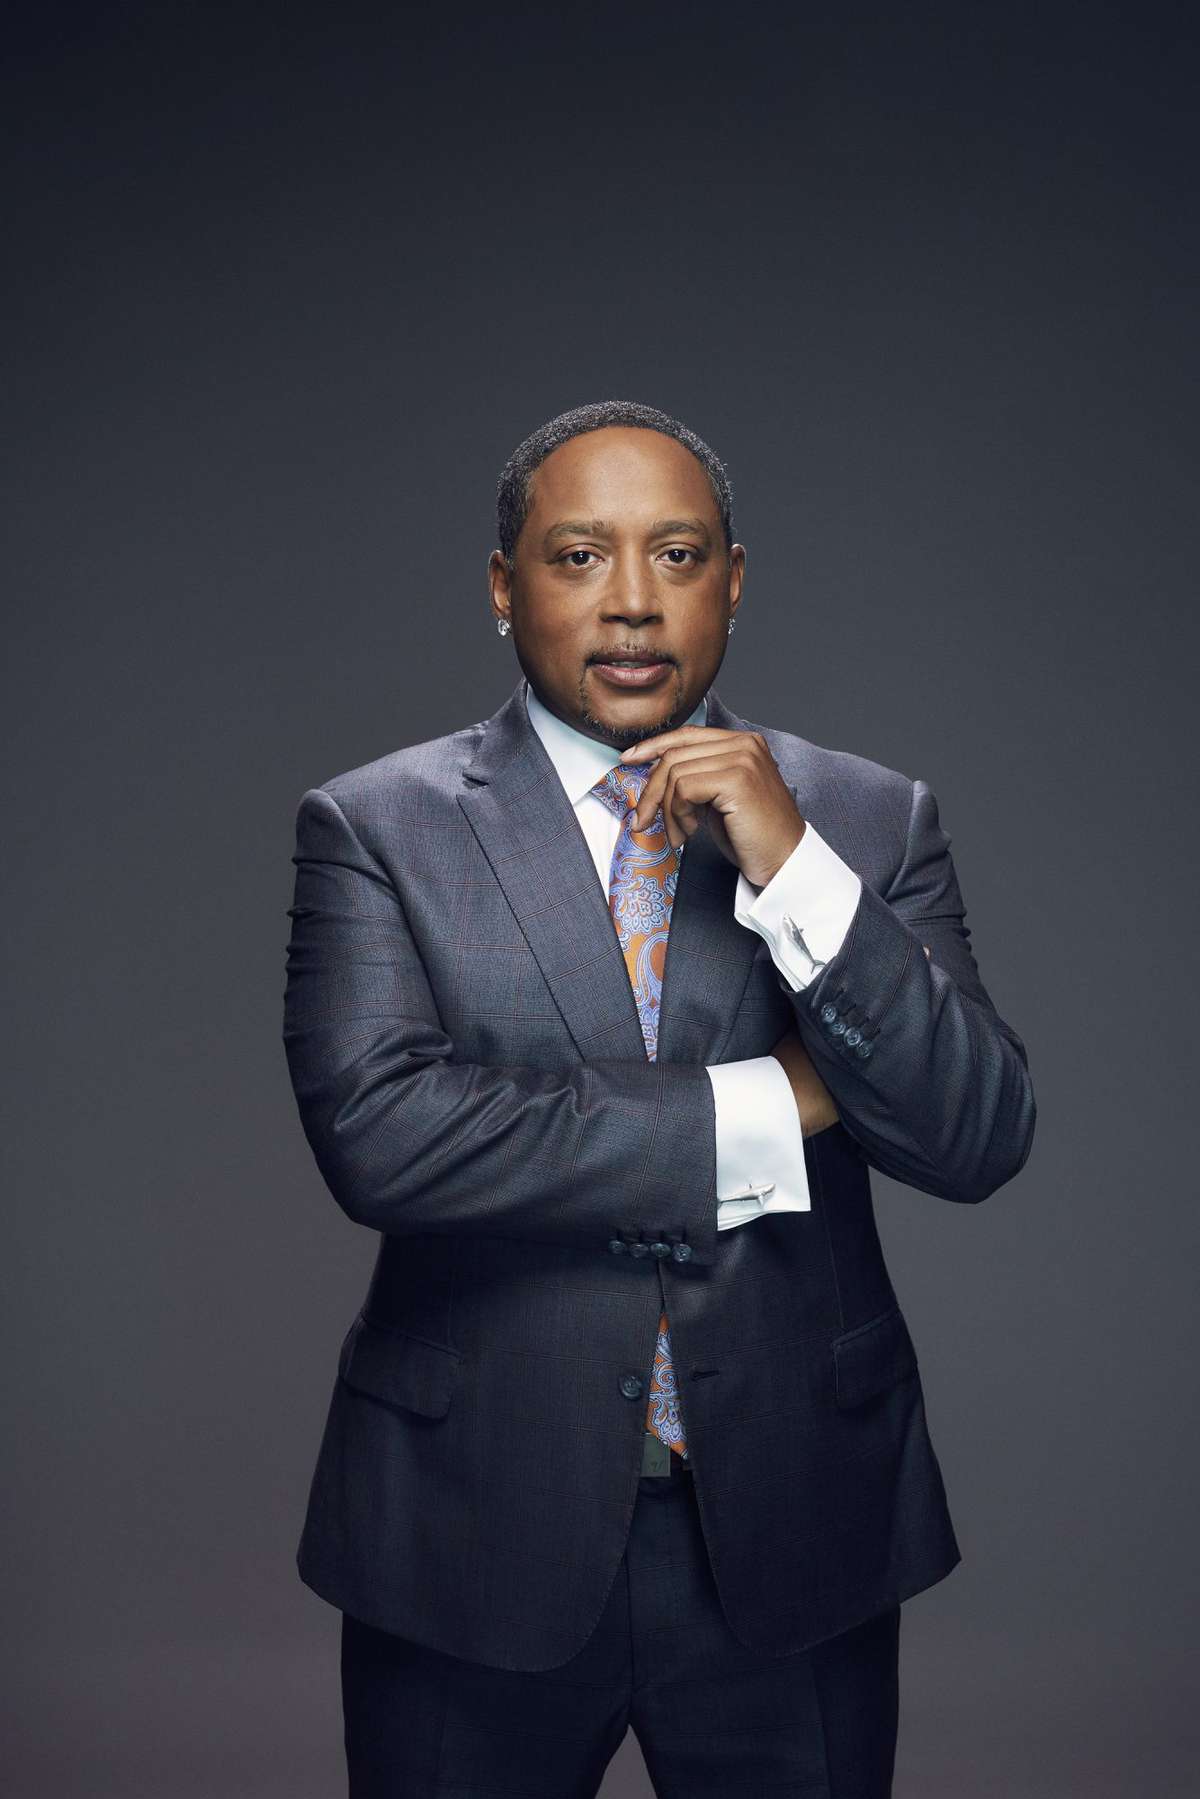 What You Need to Know About Thyroid Cancer and Shark Tank's Daymond John's Diagnosis